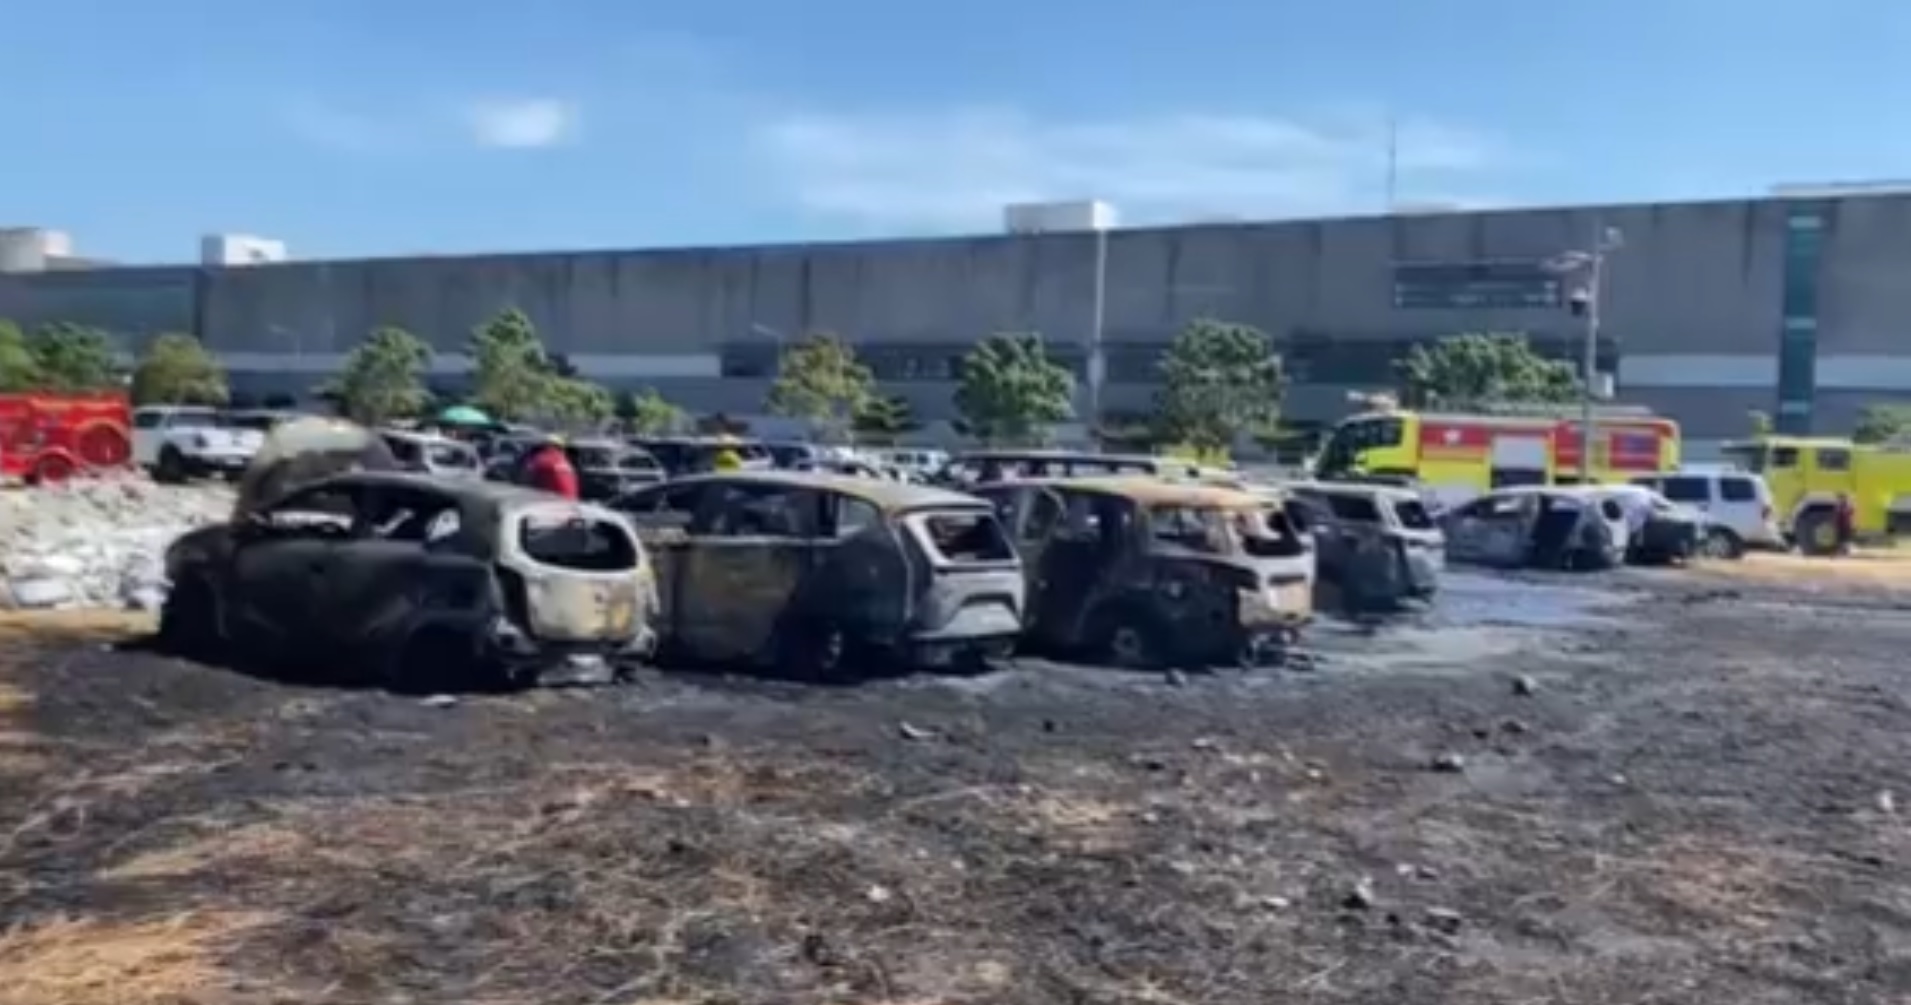 MIAA orders removal of dry grass at NAIA parking lot after fire incident